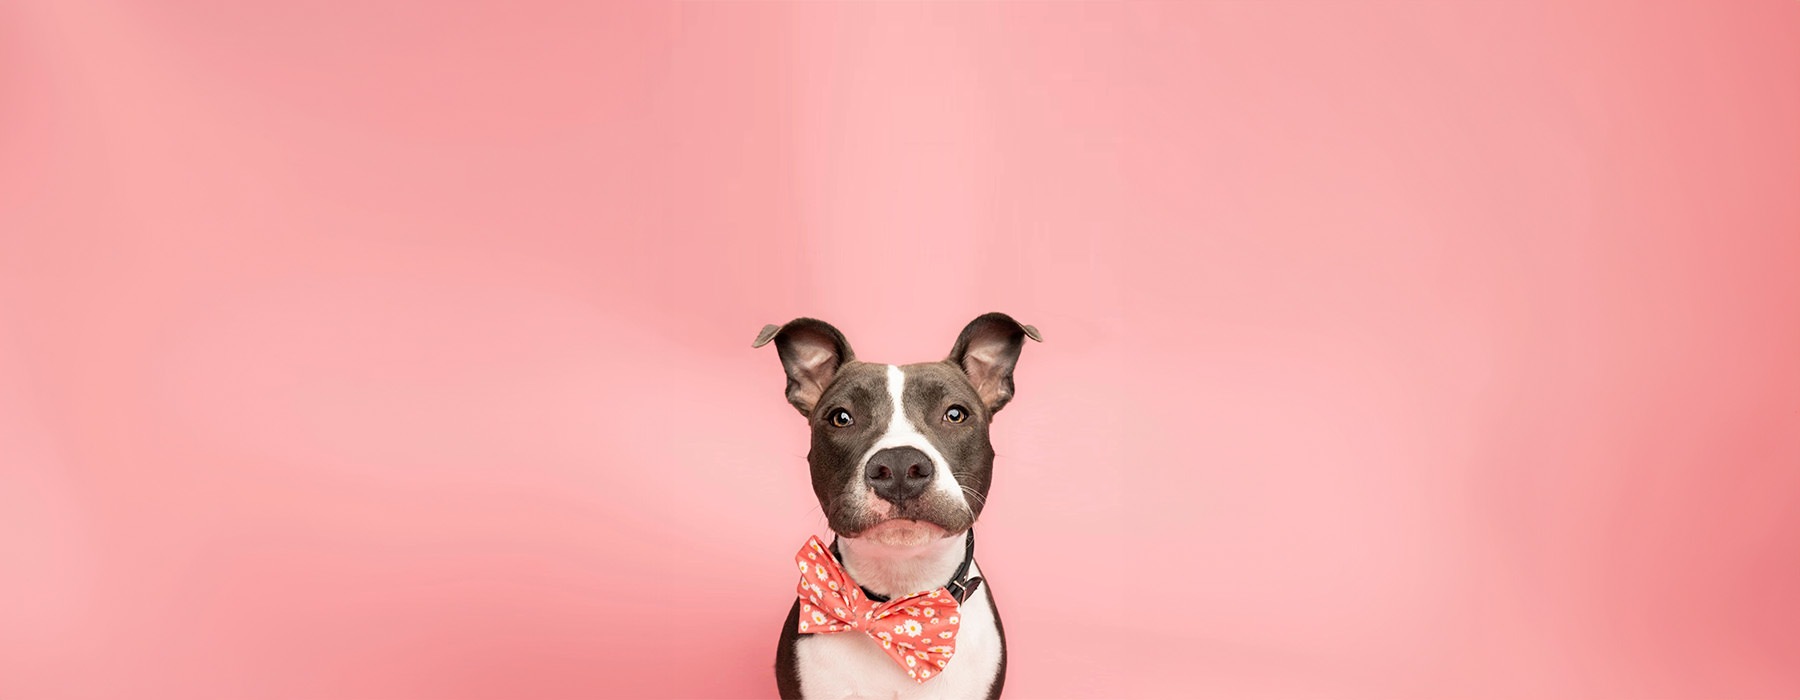 a dog with a pink background